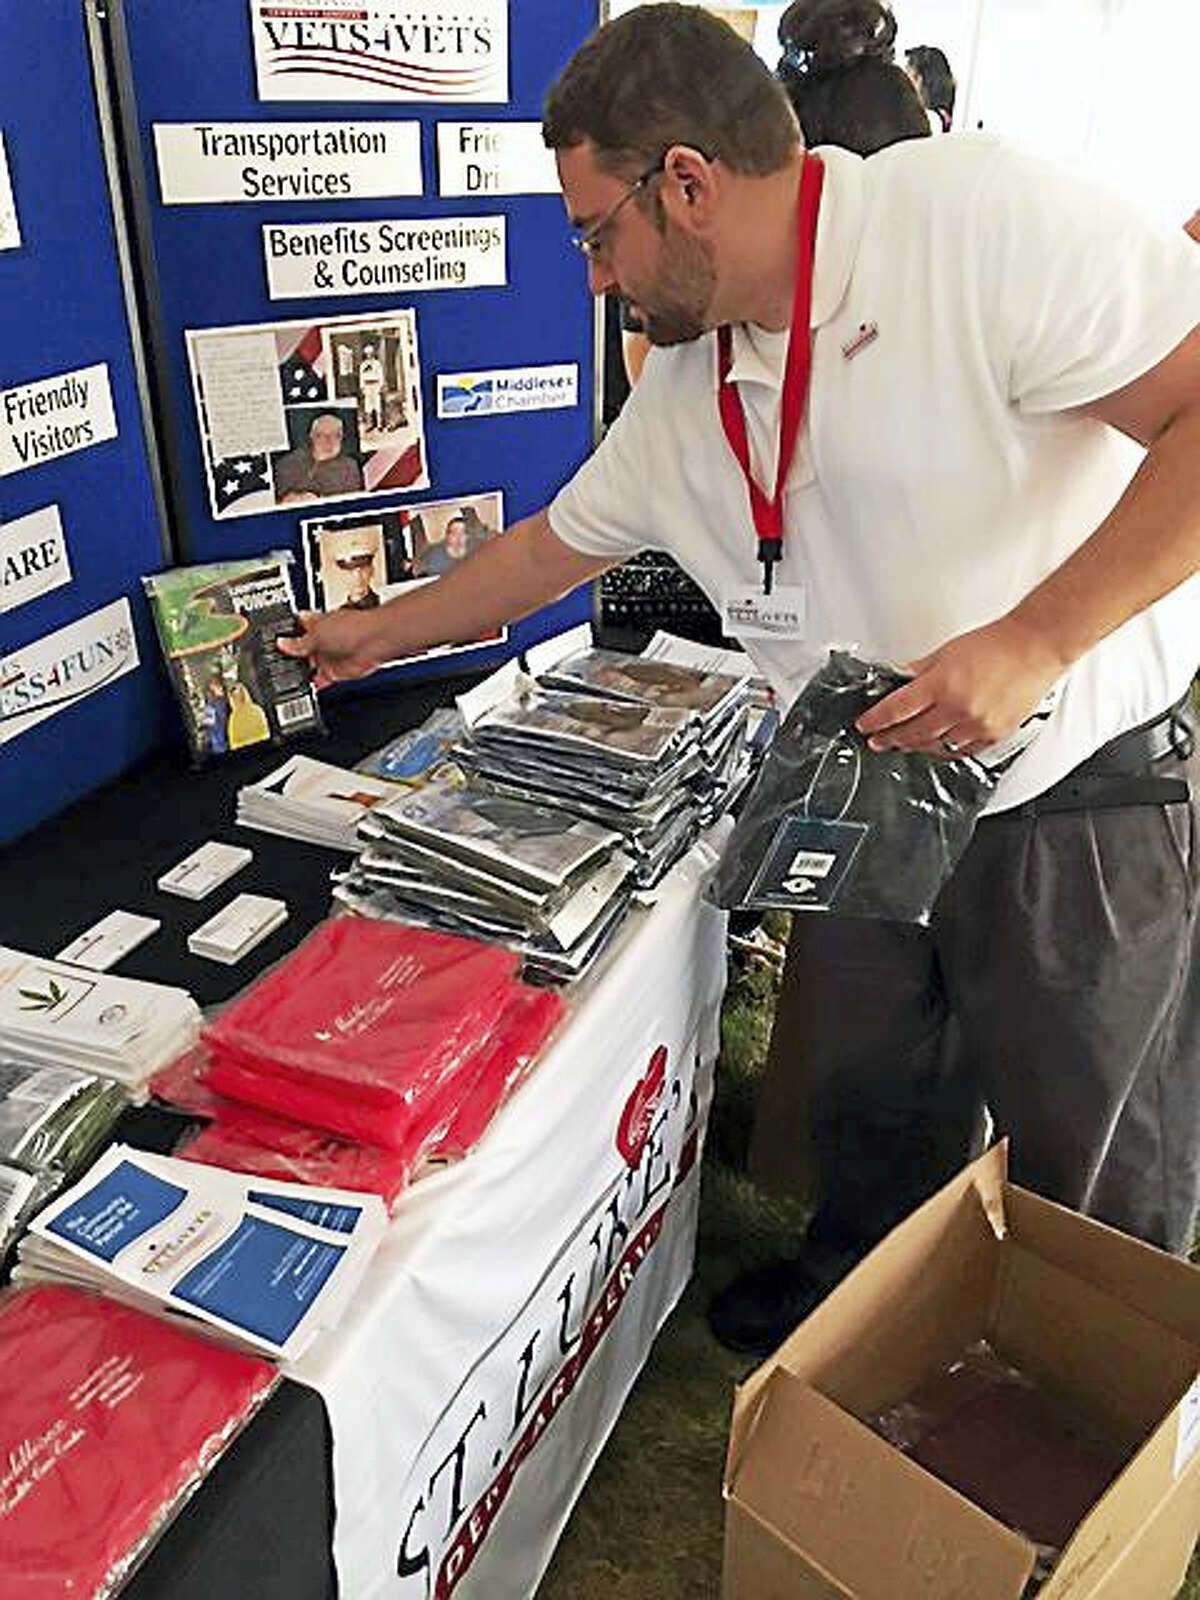 Volunteers for St. Luke’s Vets4Vets program helped provide transportation to the 2015 Operation Stand Down event for homeless veterans at the Connecticut Veterans Home, Rocky Hill.